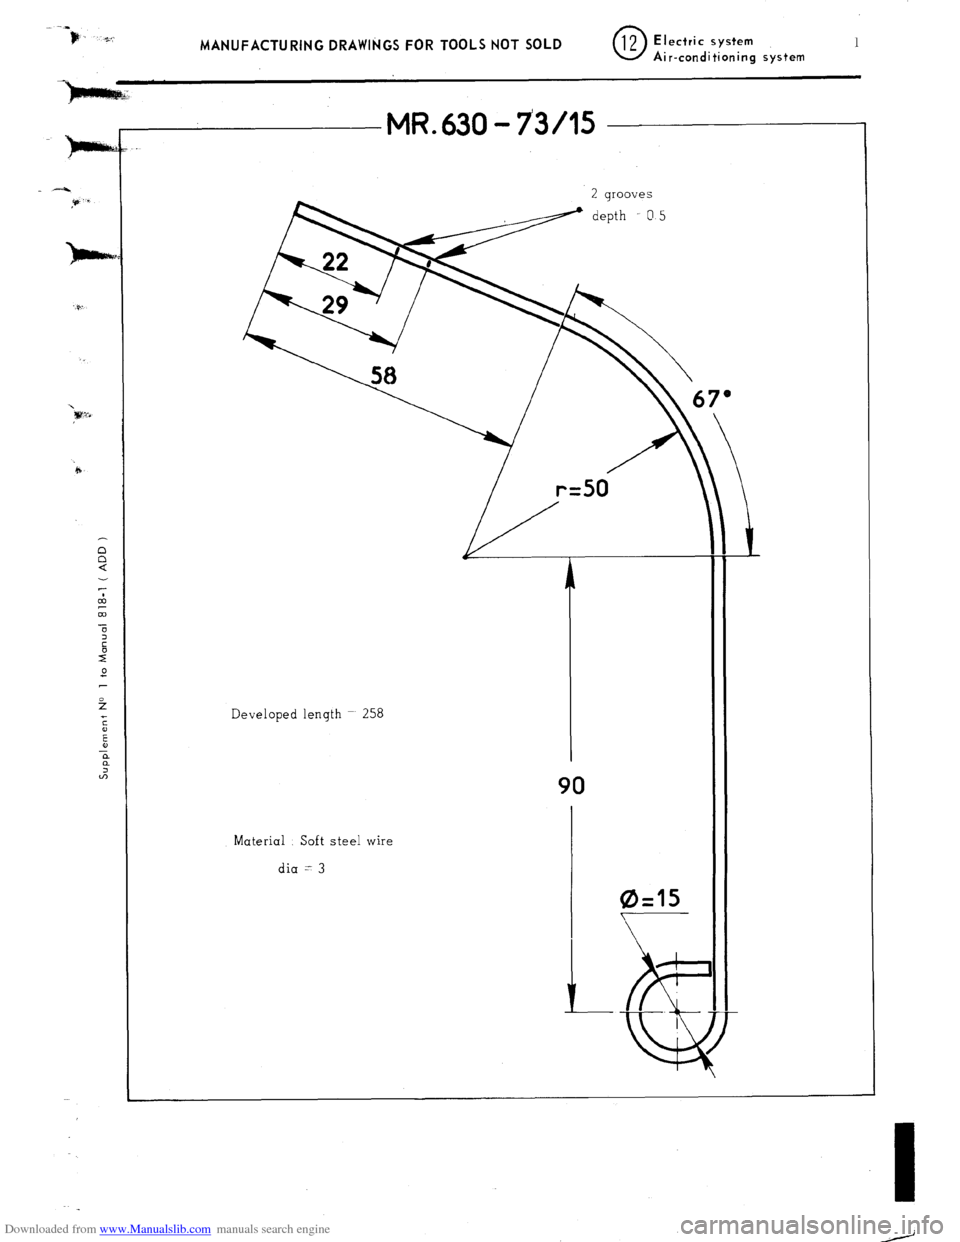 Citroen CX 1974 1.G Workshop Manual Downloaded from www.Manualslib.com manuals search engine MANUFACTURING DRAWINGS FOR TOOLS NOT SOLD 0 12 Electric system 1 Air-conditioning system n 
n 
a 
MR. 630 - 7305 
Developed length ~ 258 
Mater